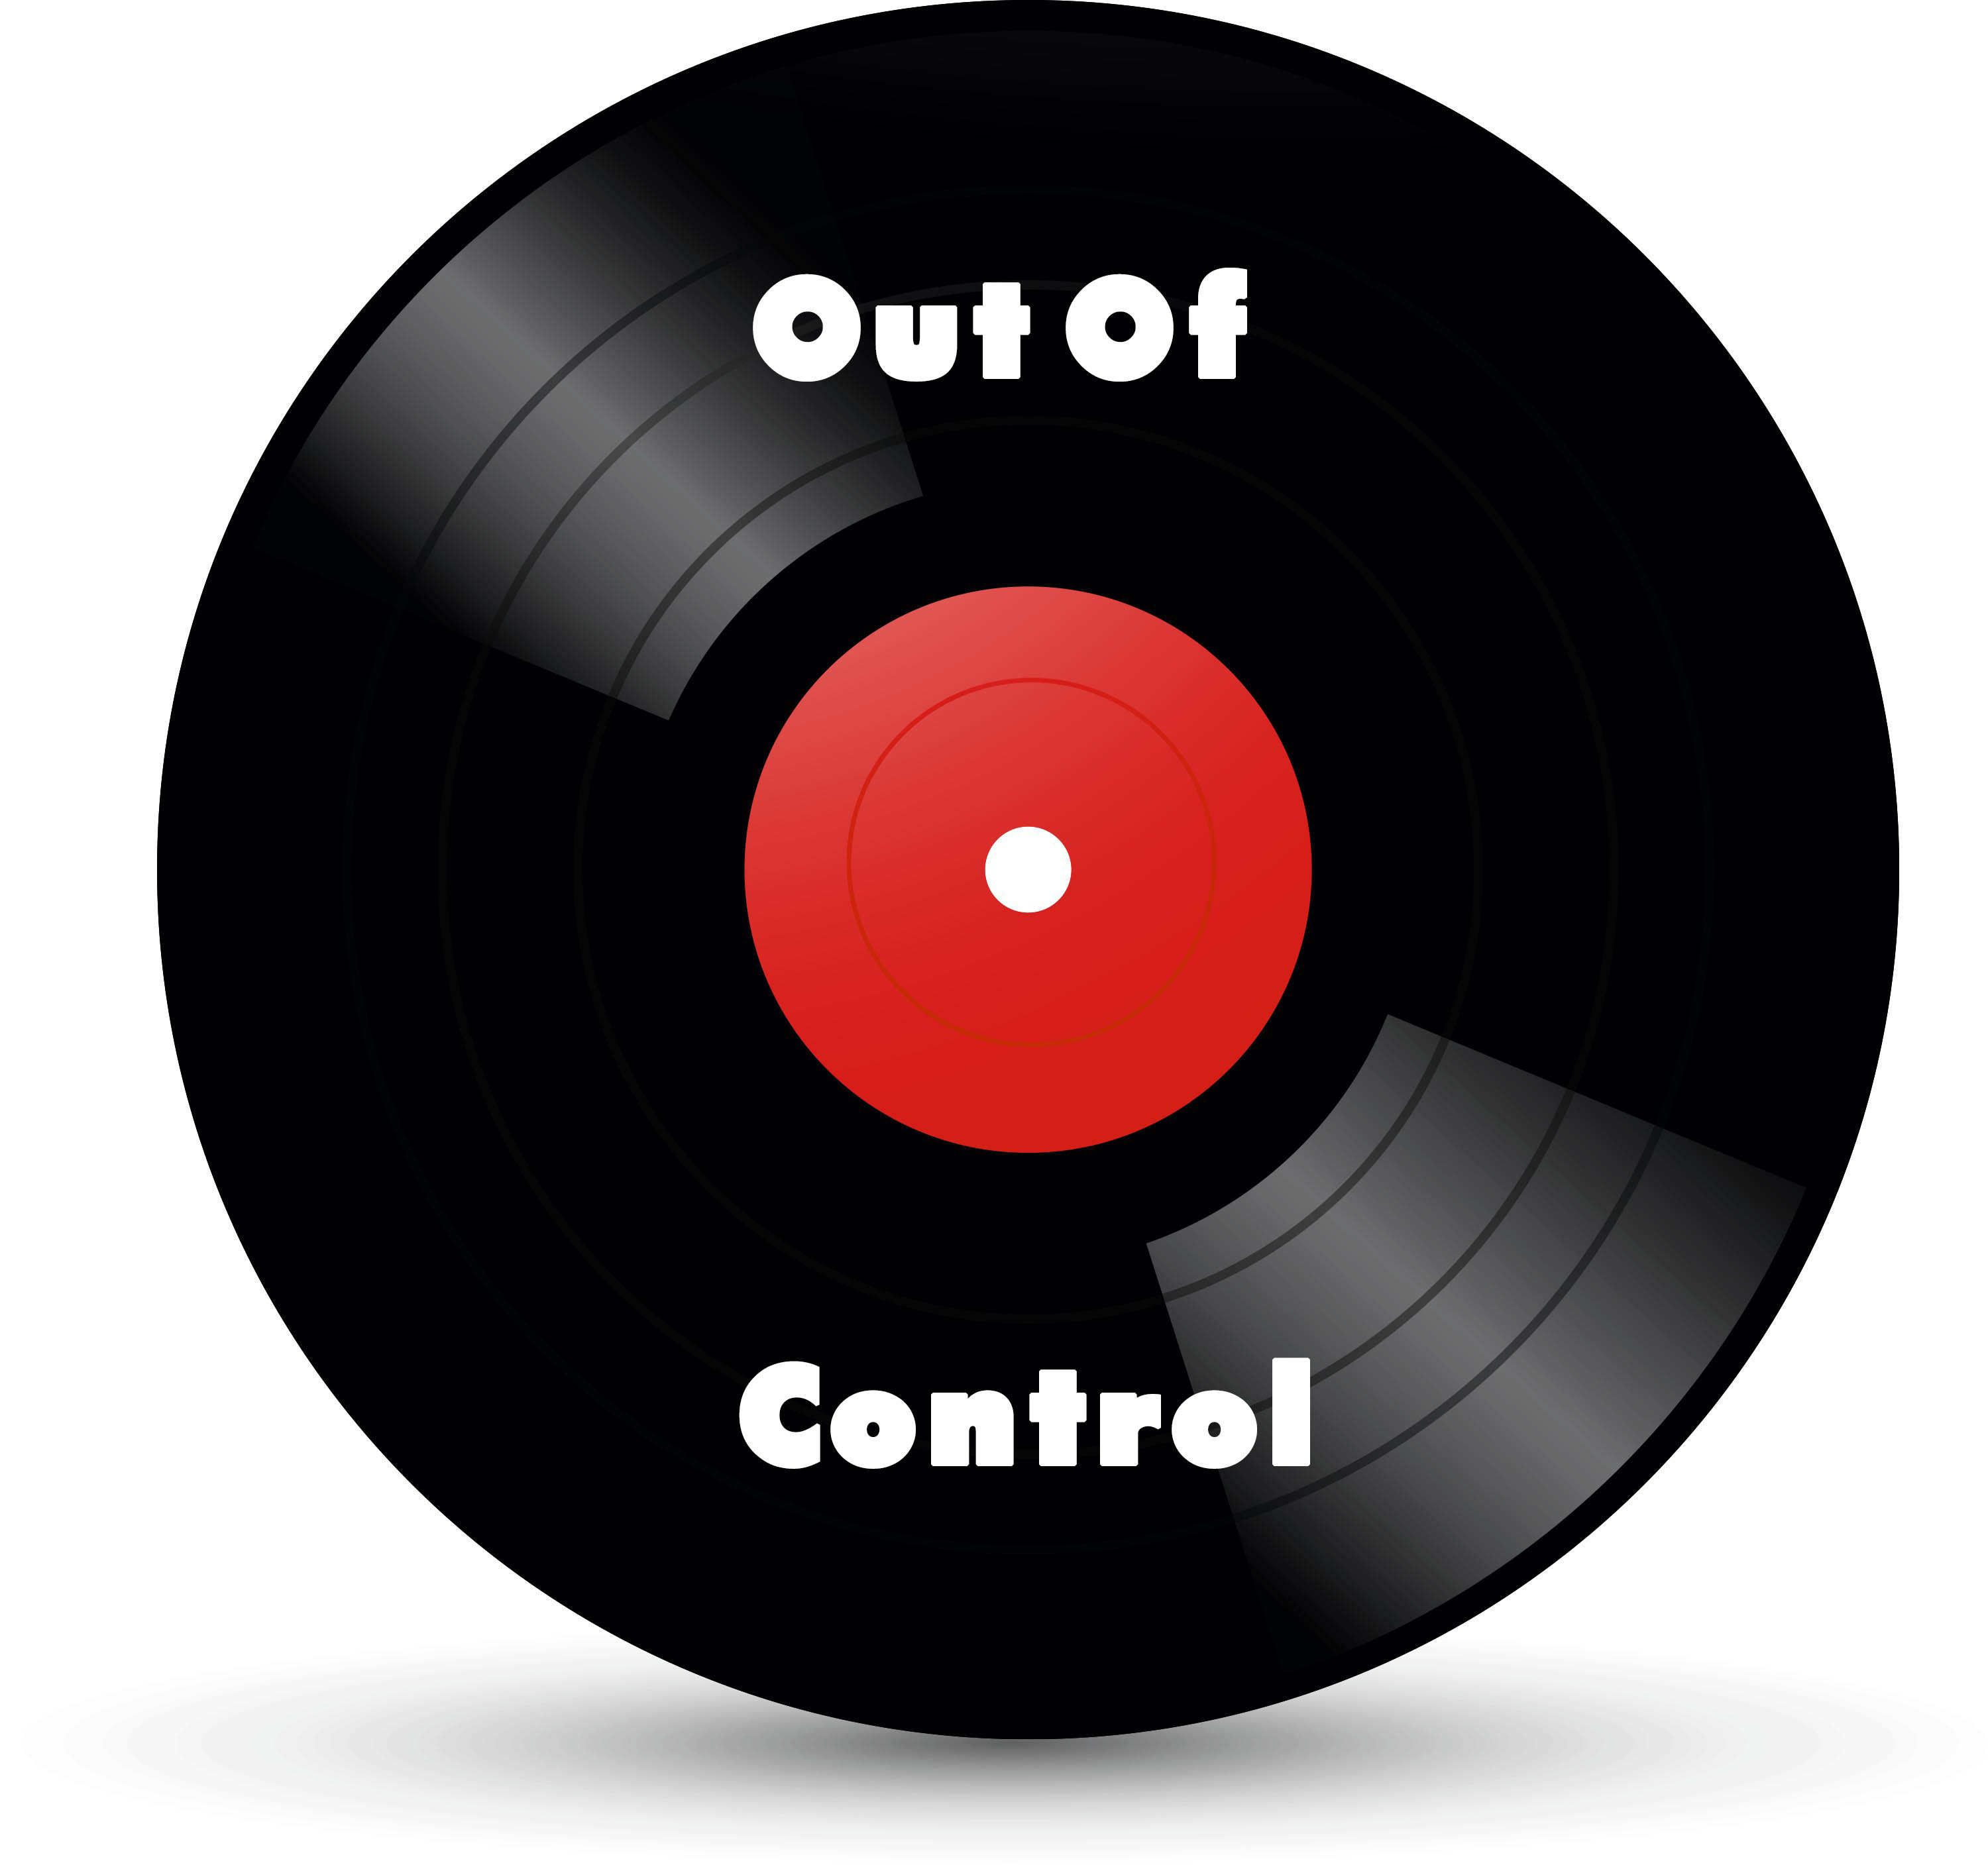 DAQ - "Out of Control" song